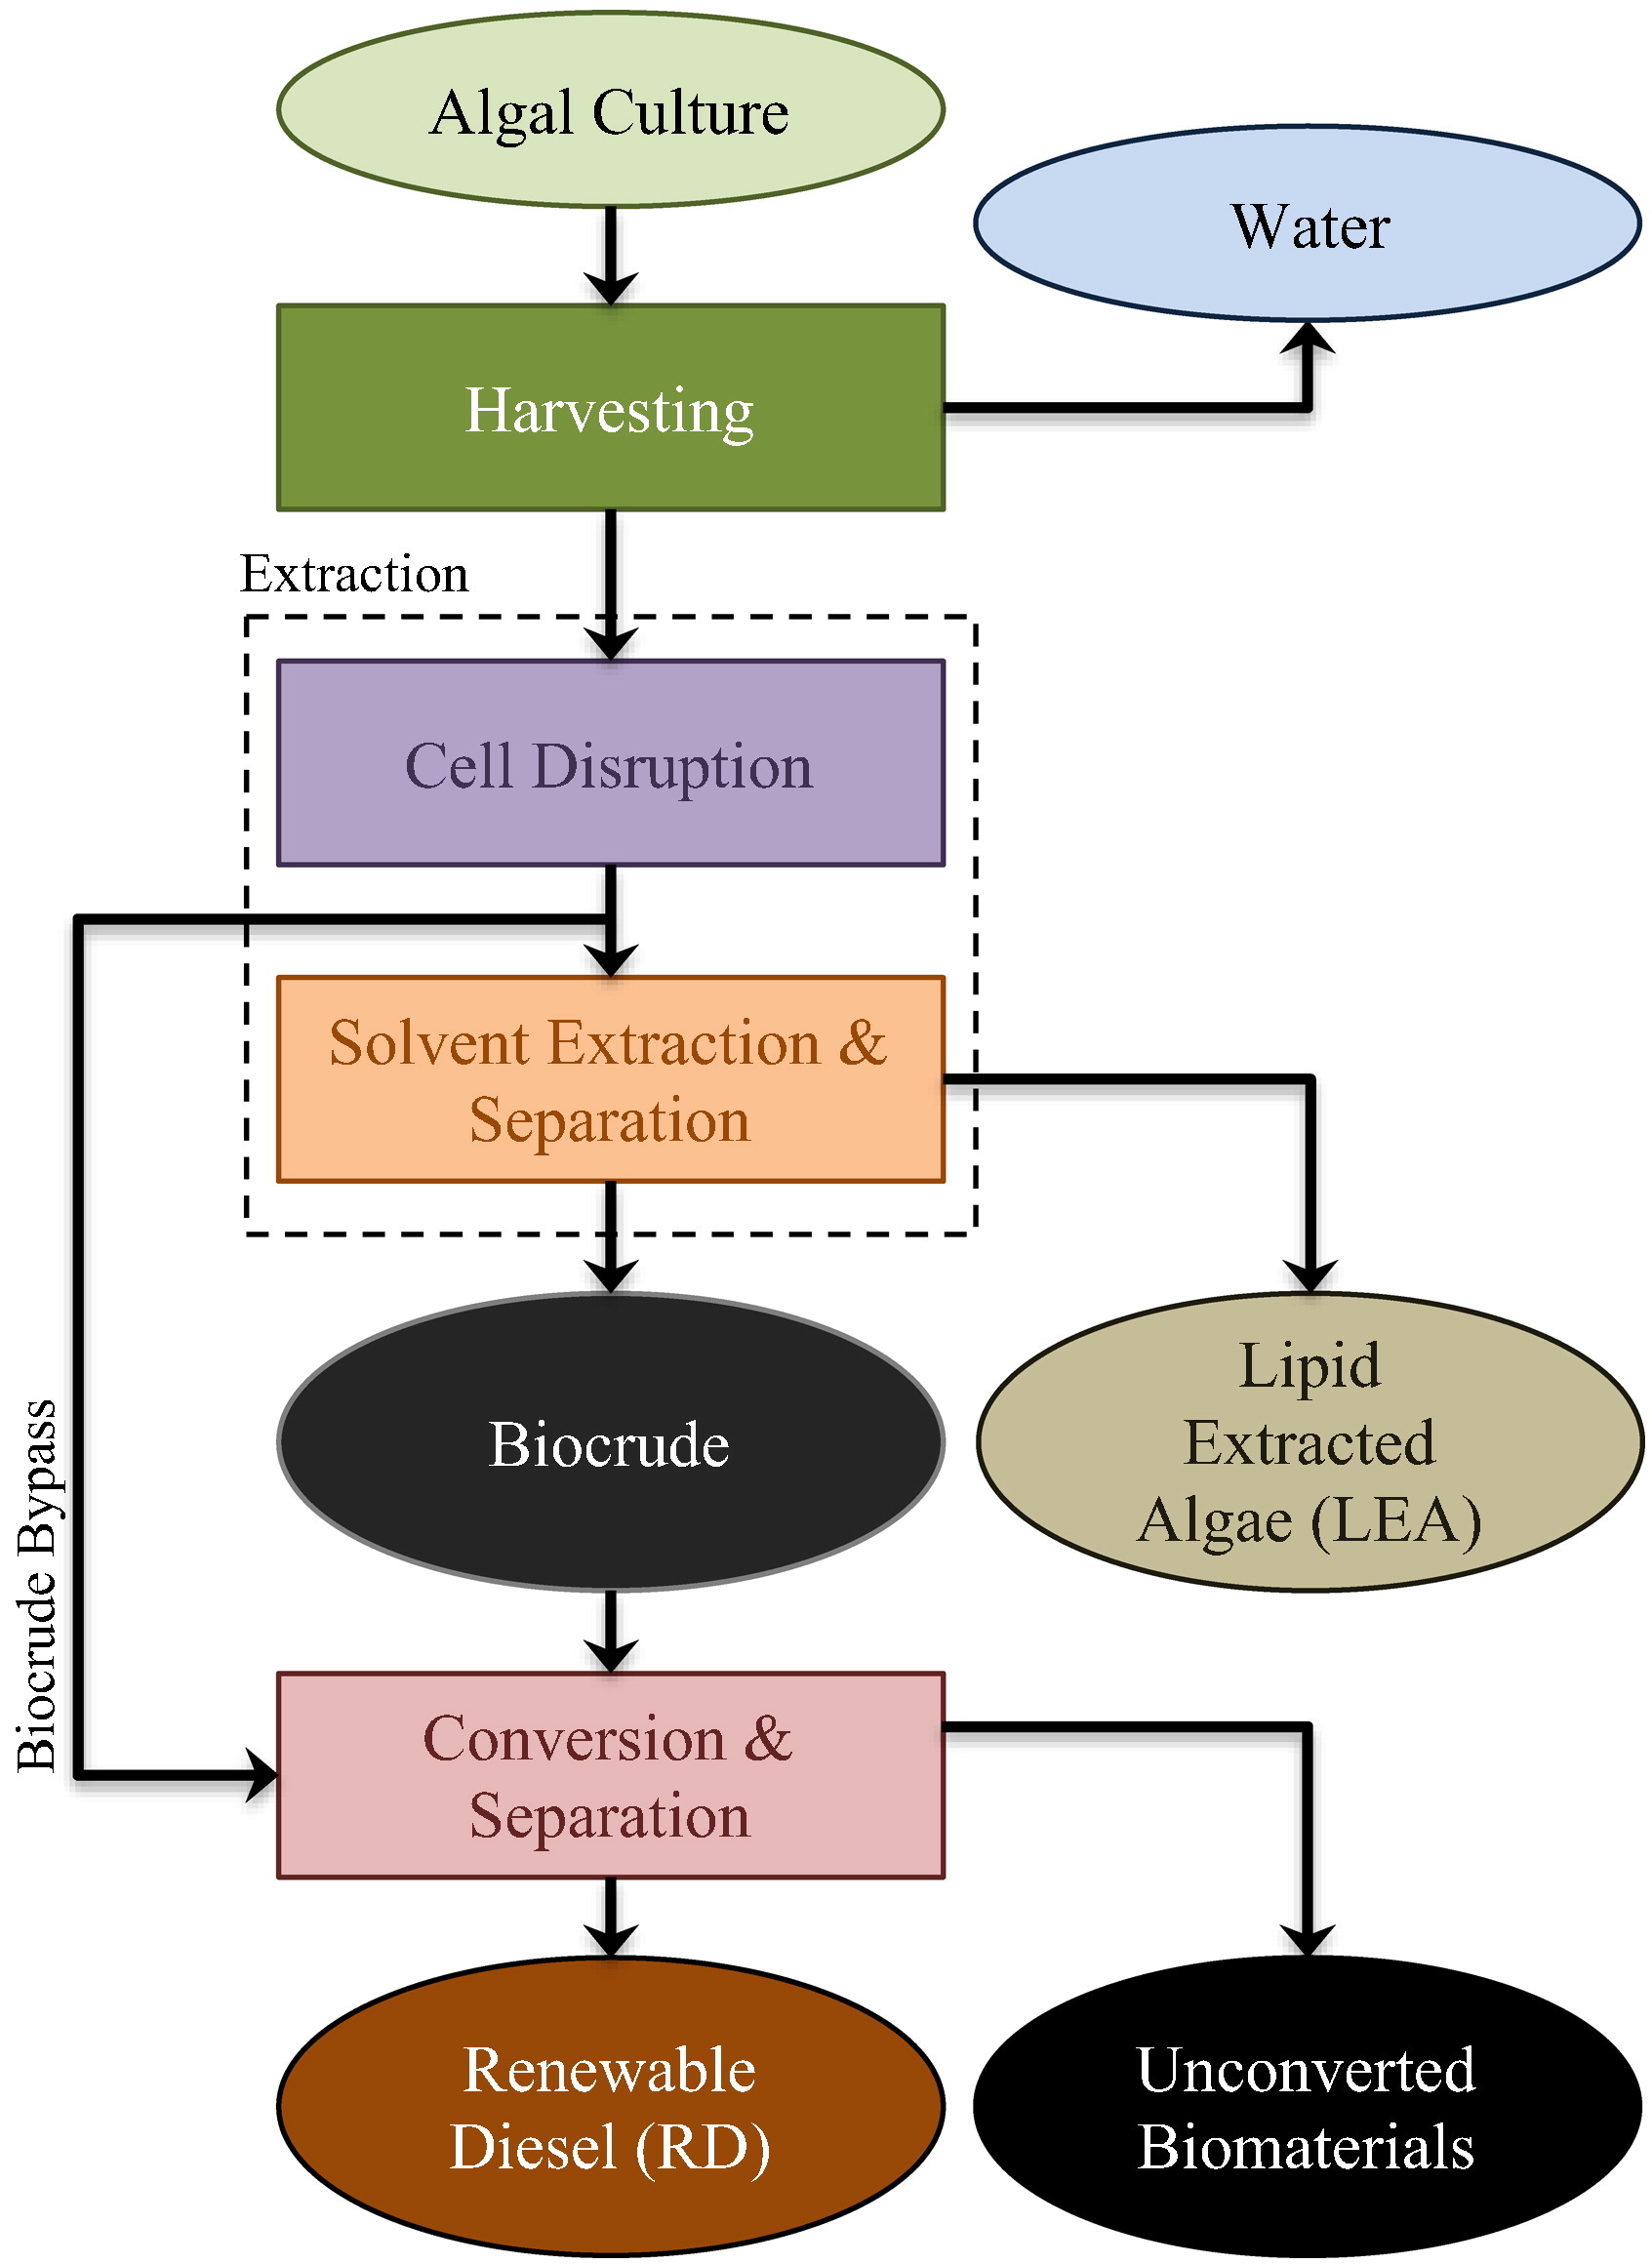 Getting to Low-Cost Algal Biofuels: A Monograph on Conventional and Cutting-Edge Harvesting and Extraction Technologies